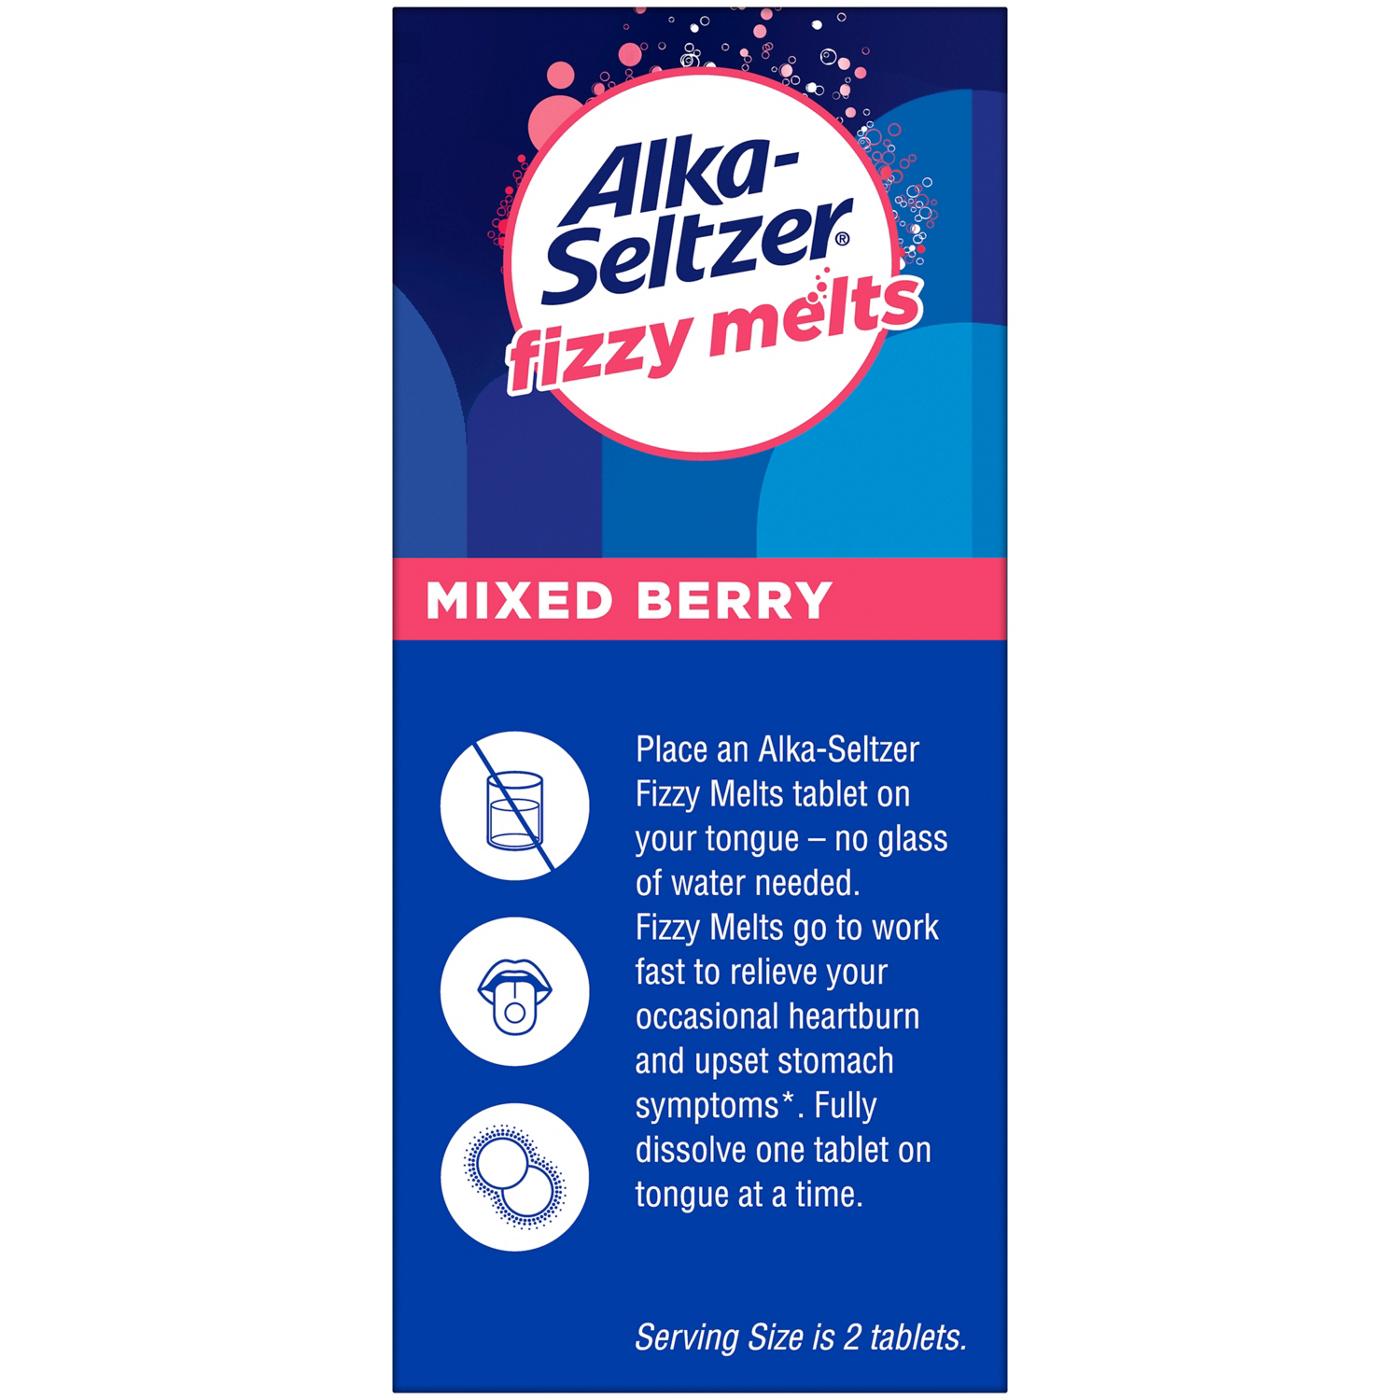 Alka-Seltzer Fizzy Melts Tablets - Mixed Berry; image 2 of 6